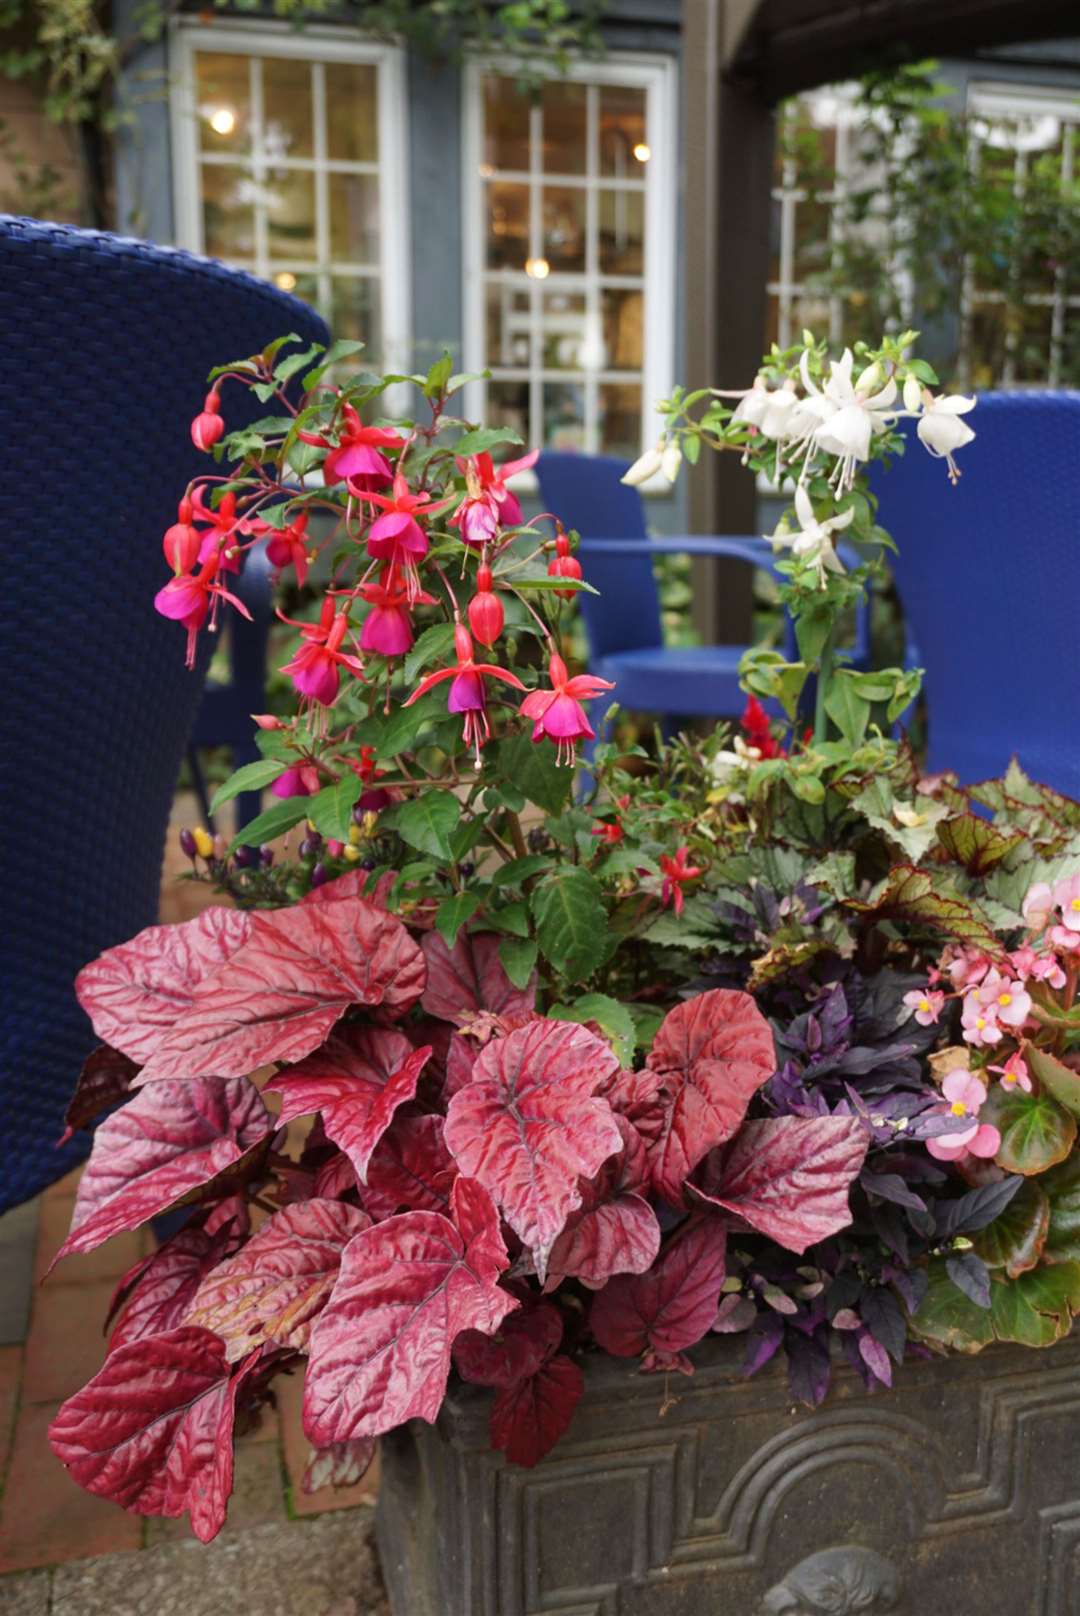 A mixed begonia and fuchsia pot. Picture: Michael Perry/PA